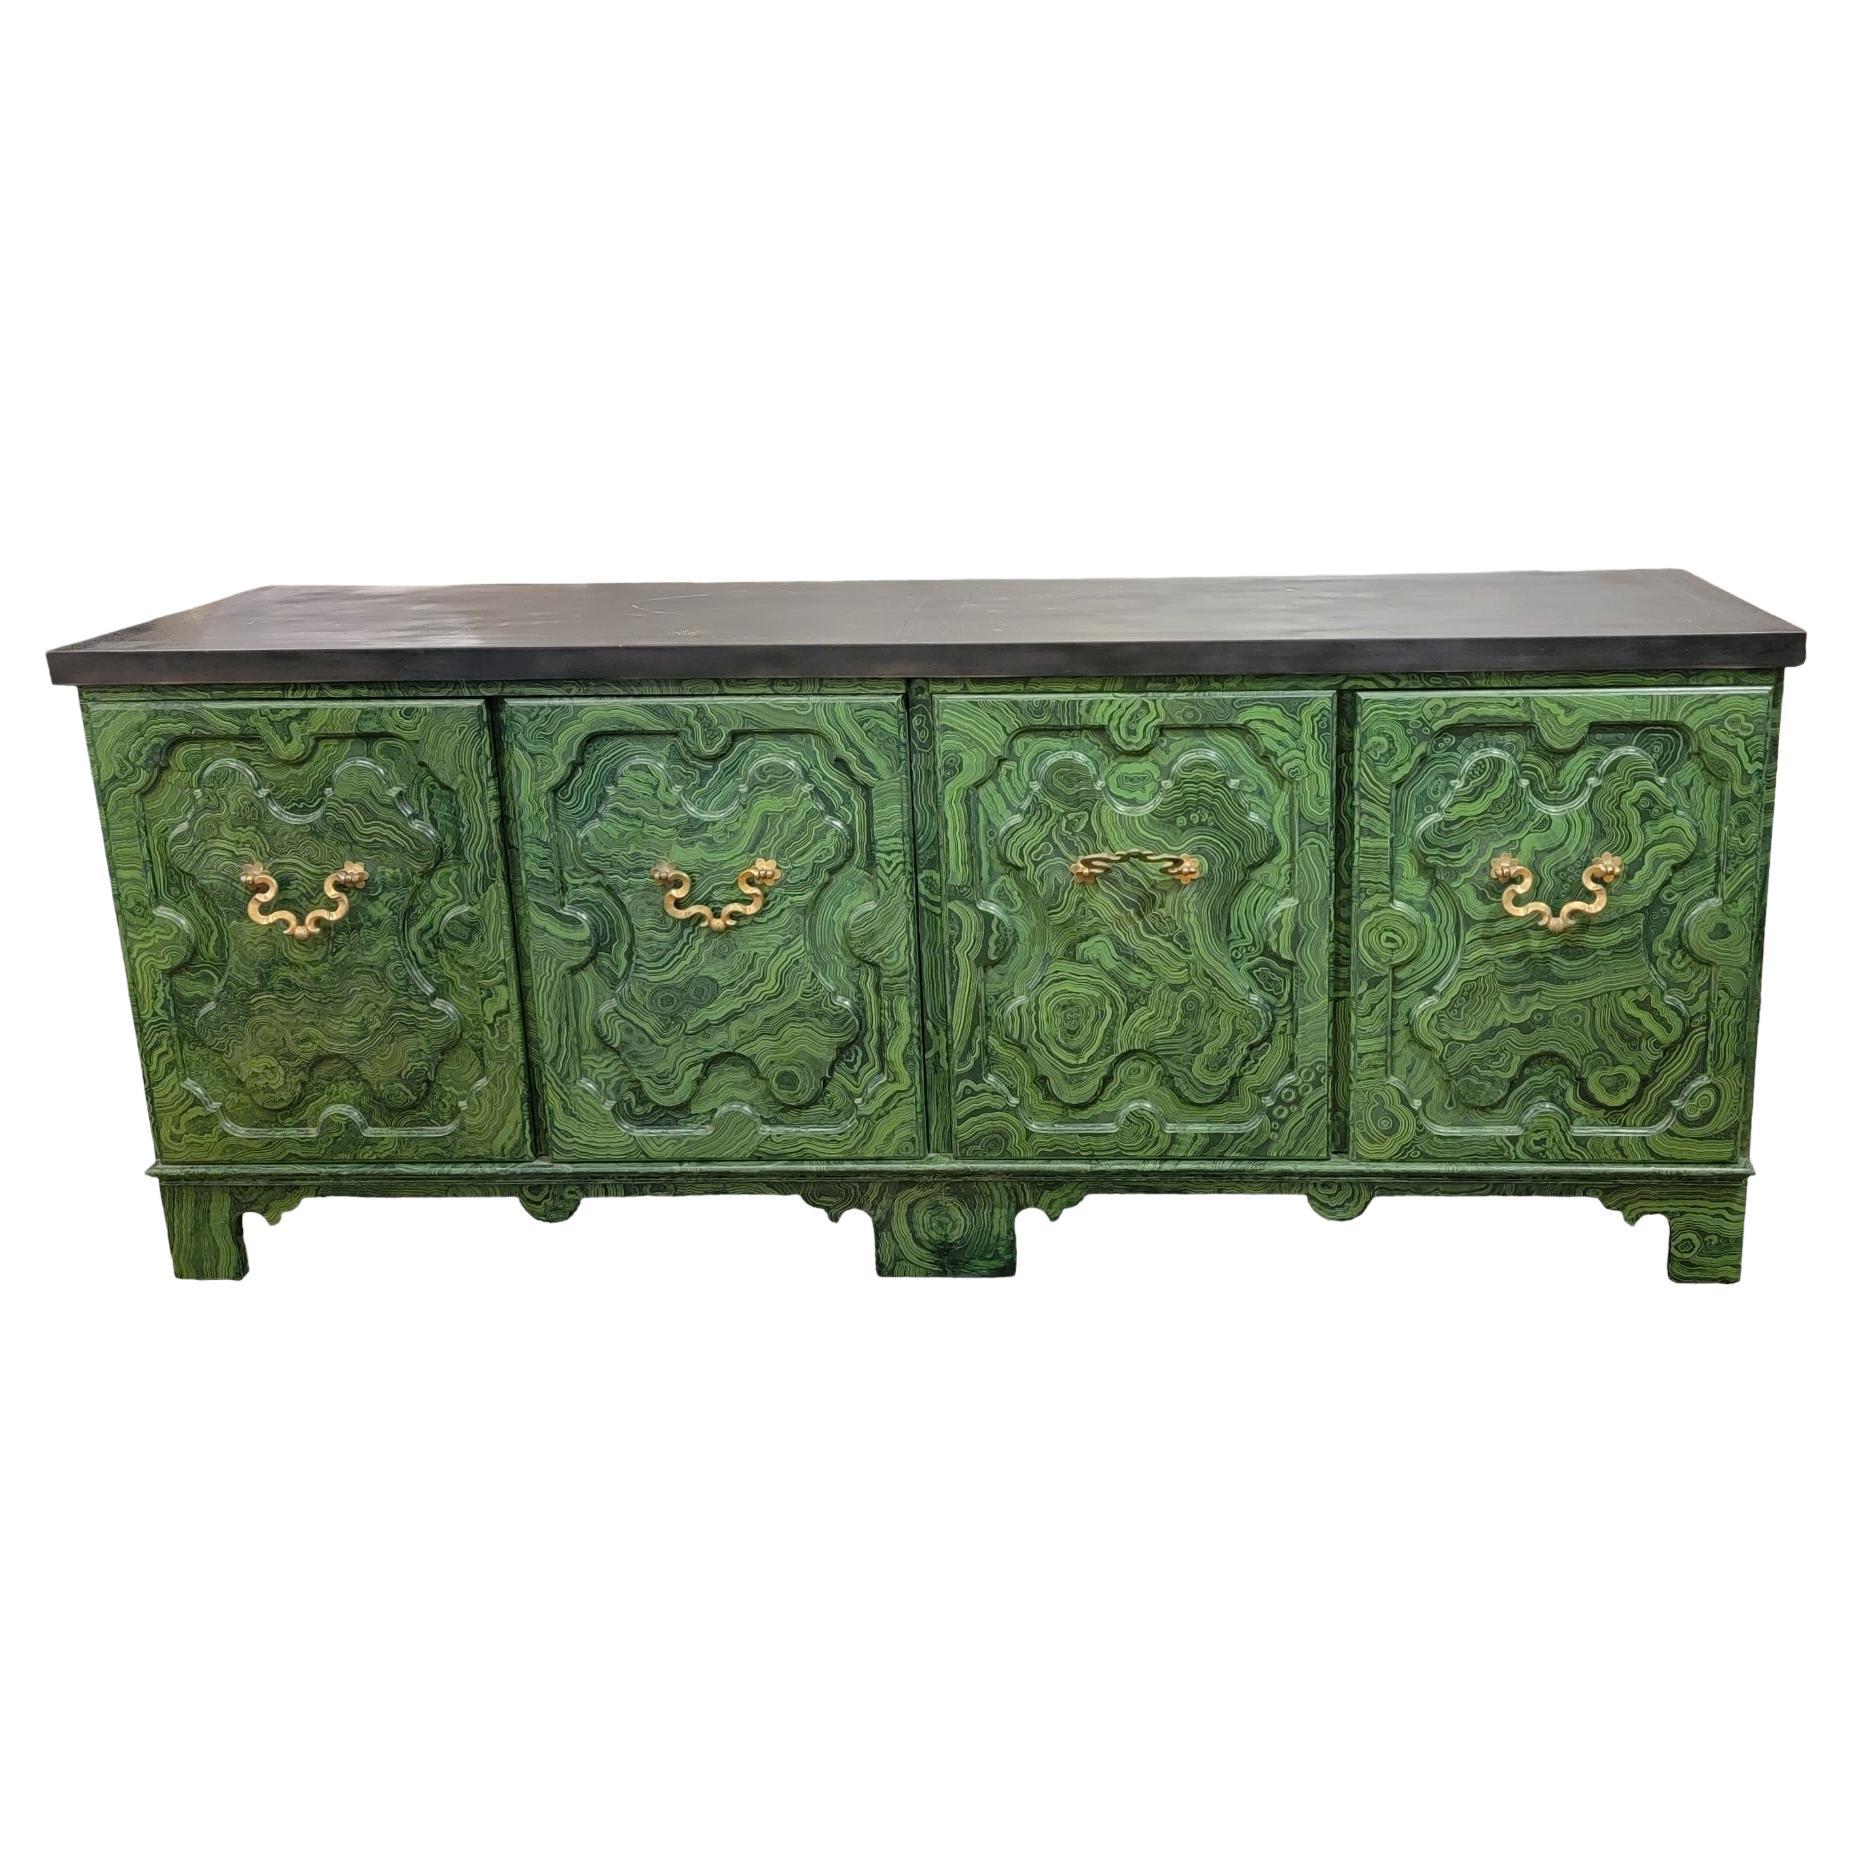 Hand Painted Baker 4 Door Credenza With Ornate Brass Handles by Tony Duquette For Sale